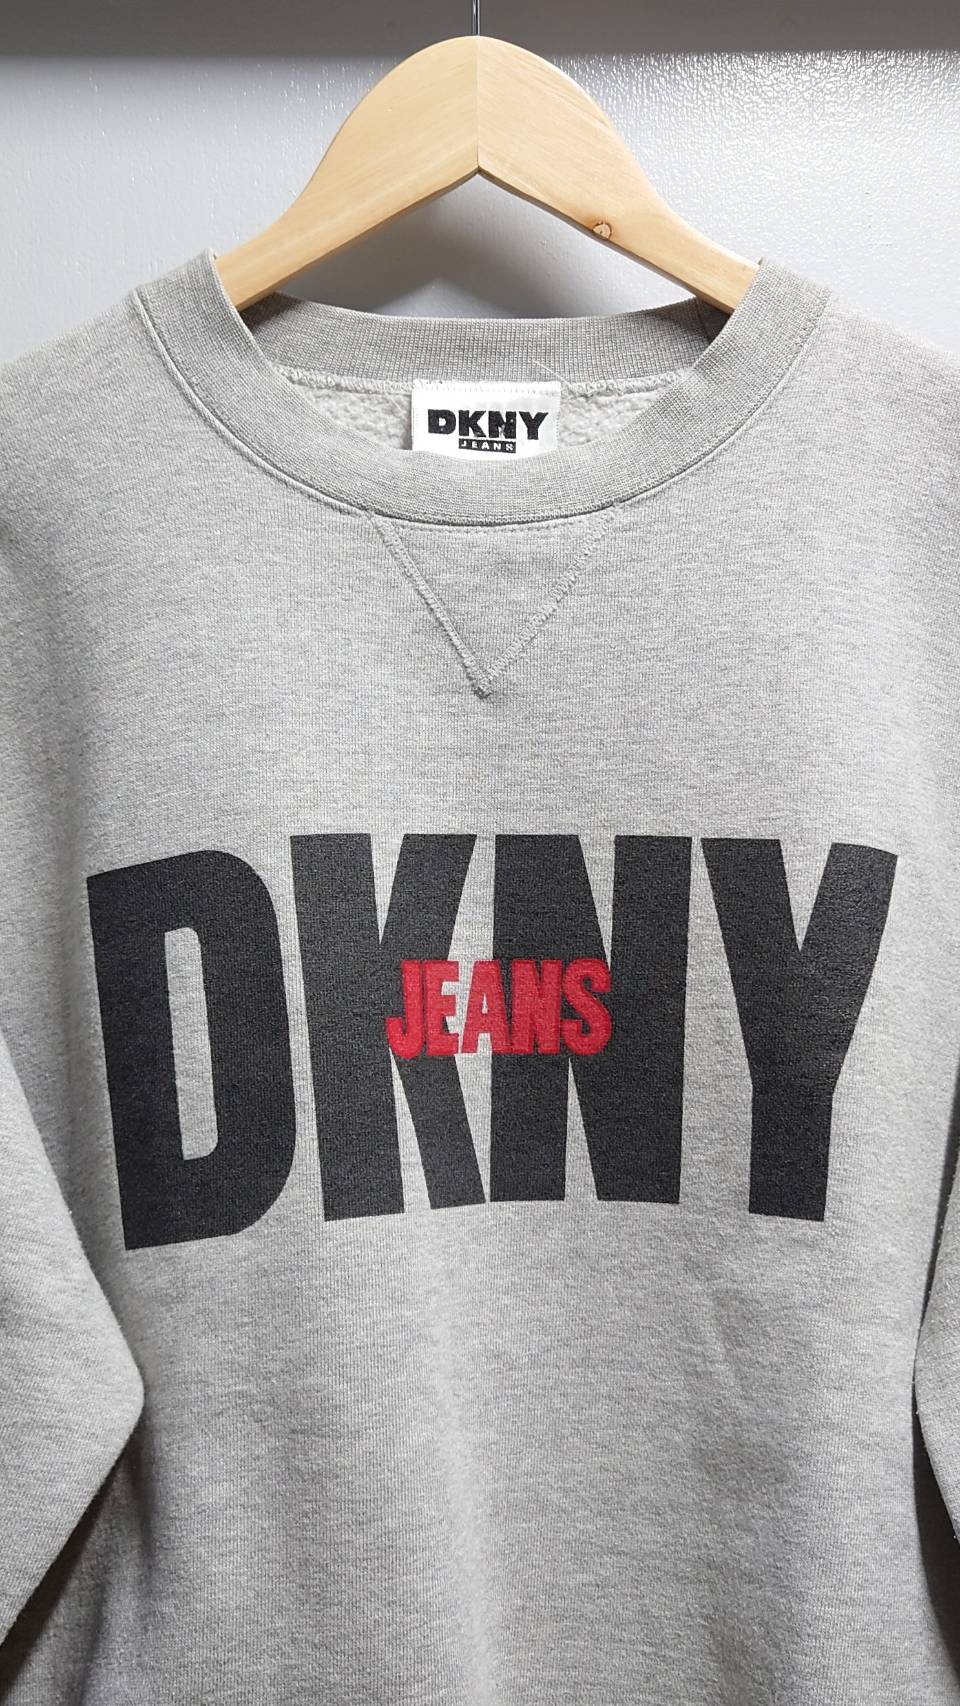 90's DKNY JEANS USA製 ロゴ プリント スウェット トレーナー